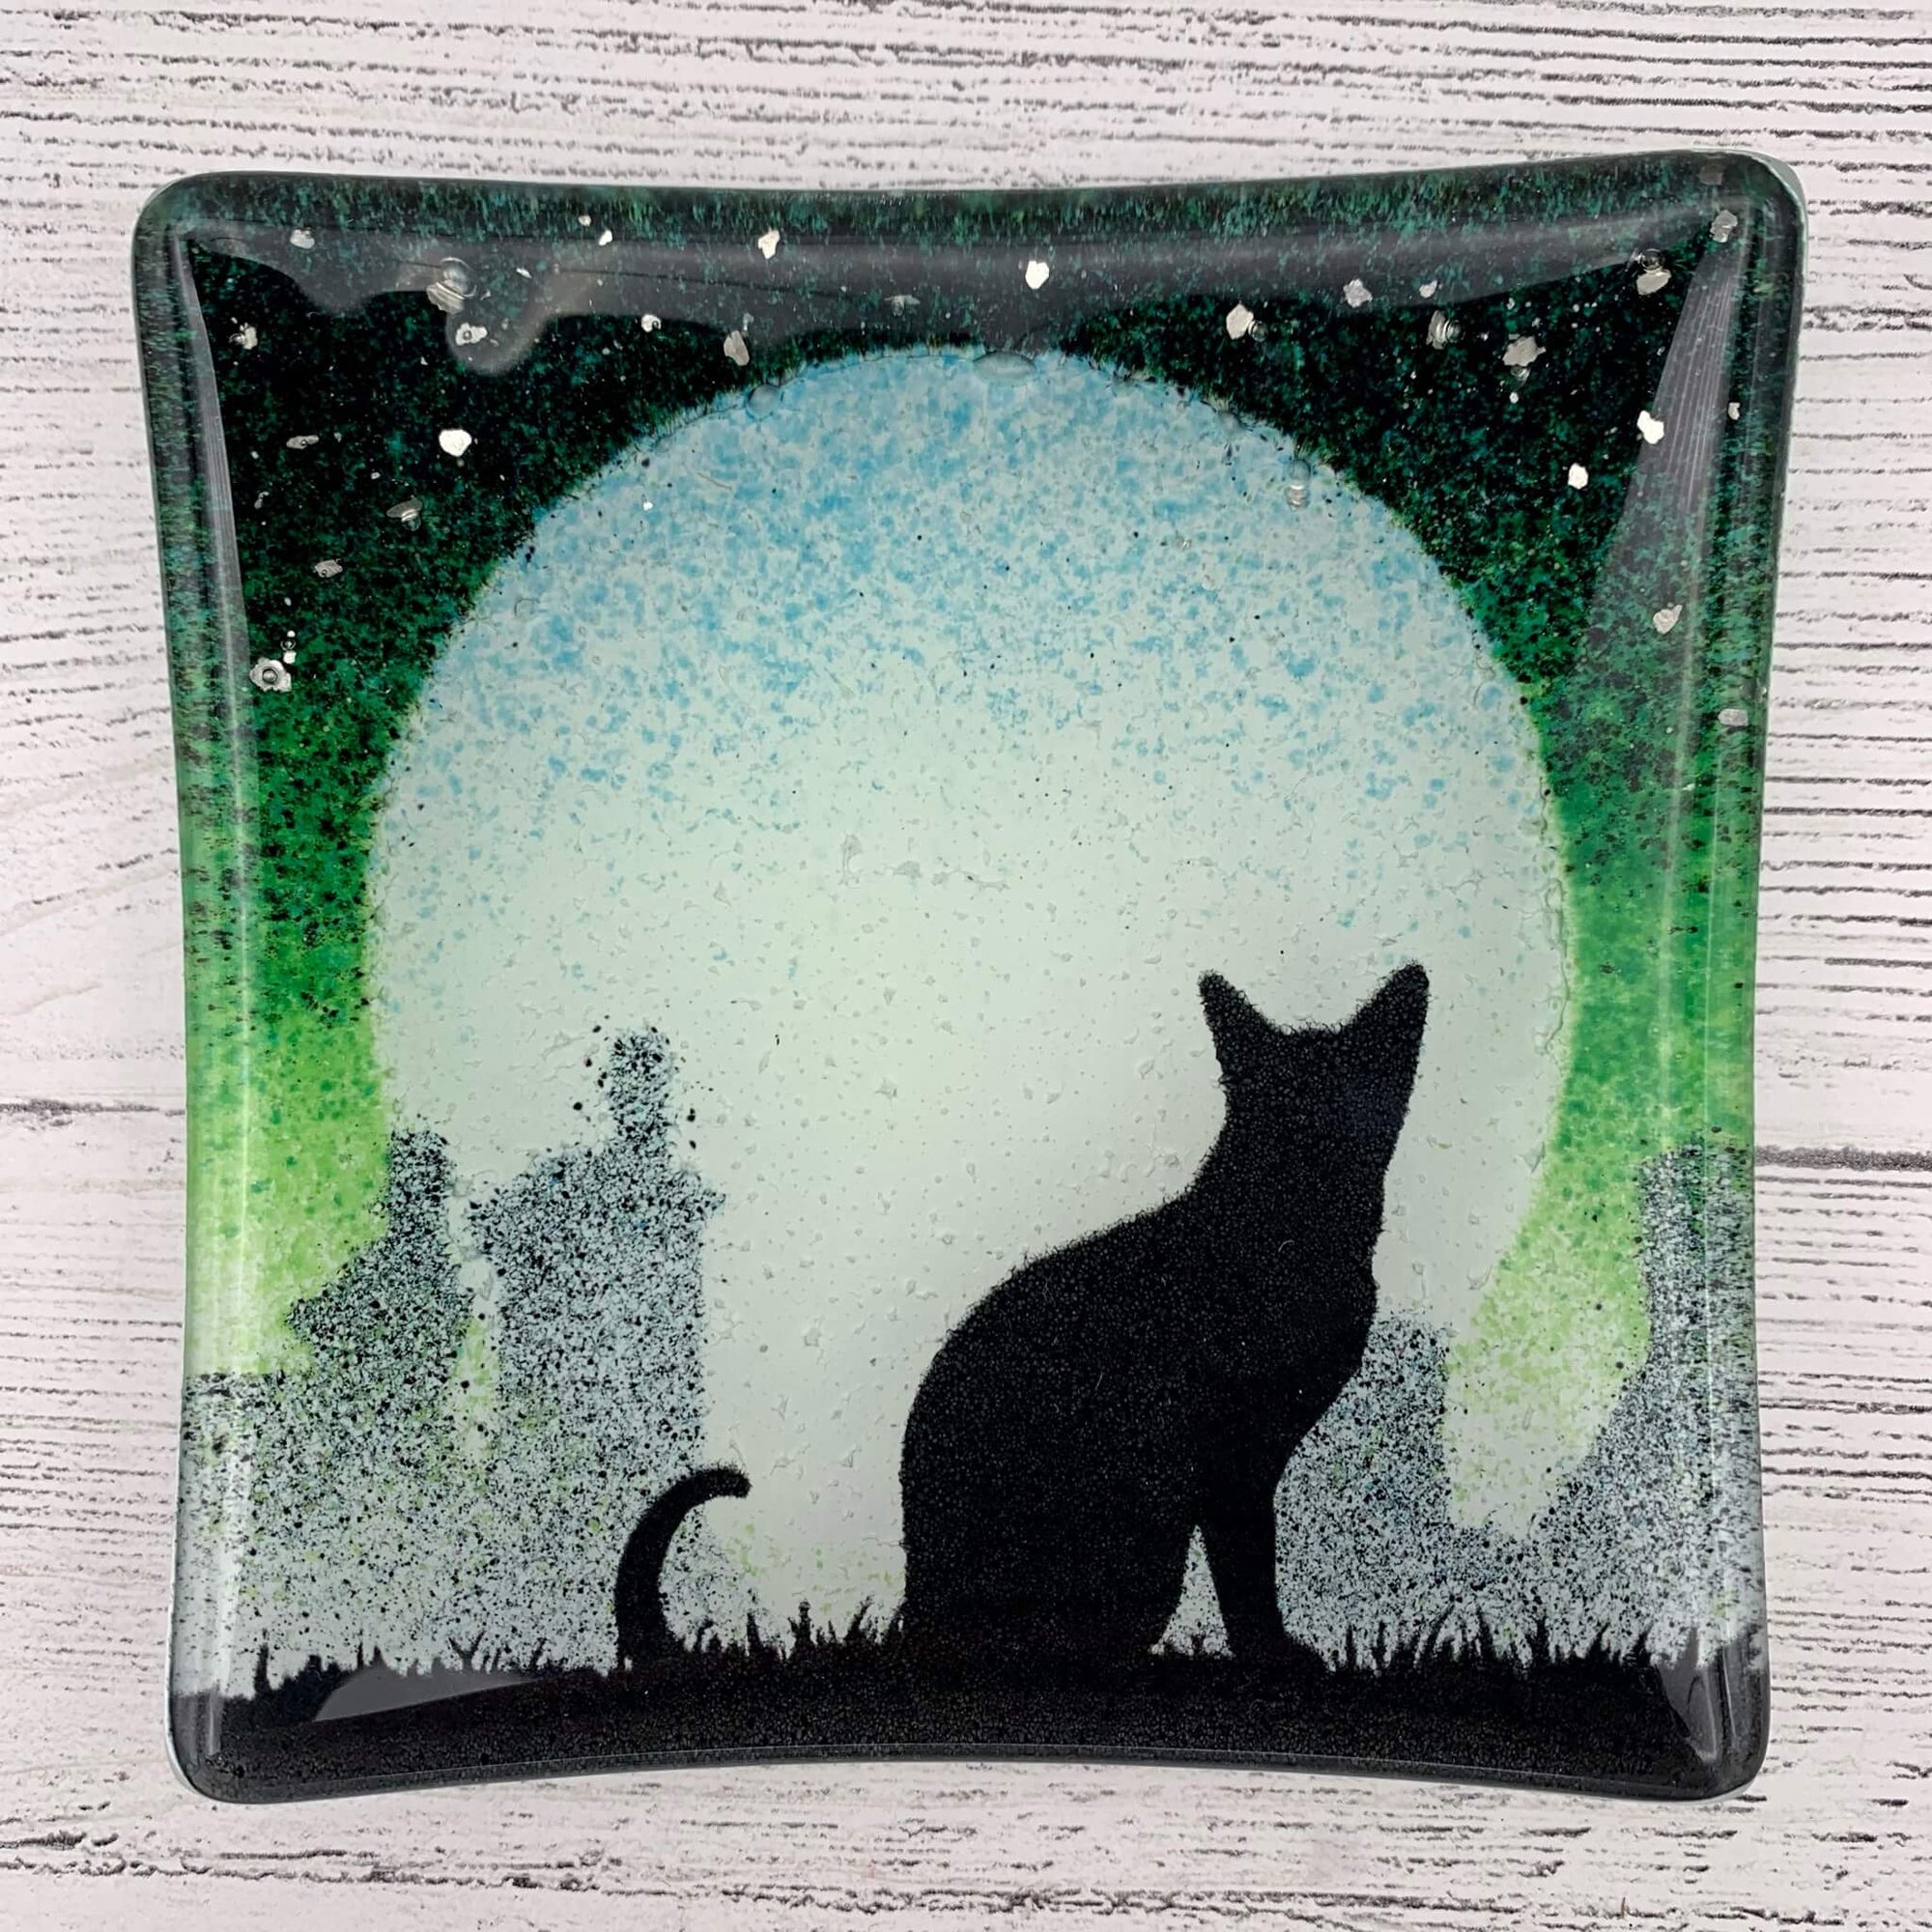 Handmade green fused glass jewellery and trinket dish, featuring a cat silhouette, with a big moon behind and sprinkles of glitter for stars. 